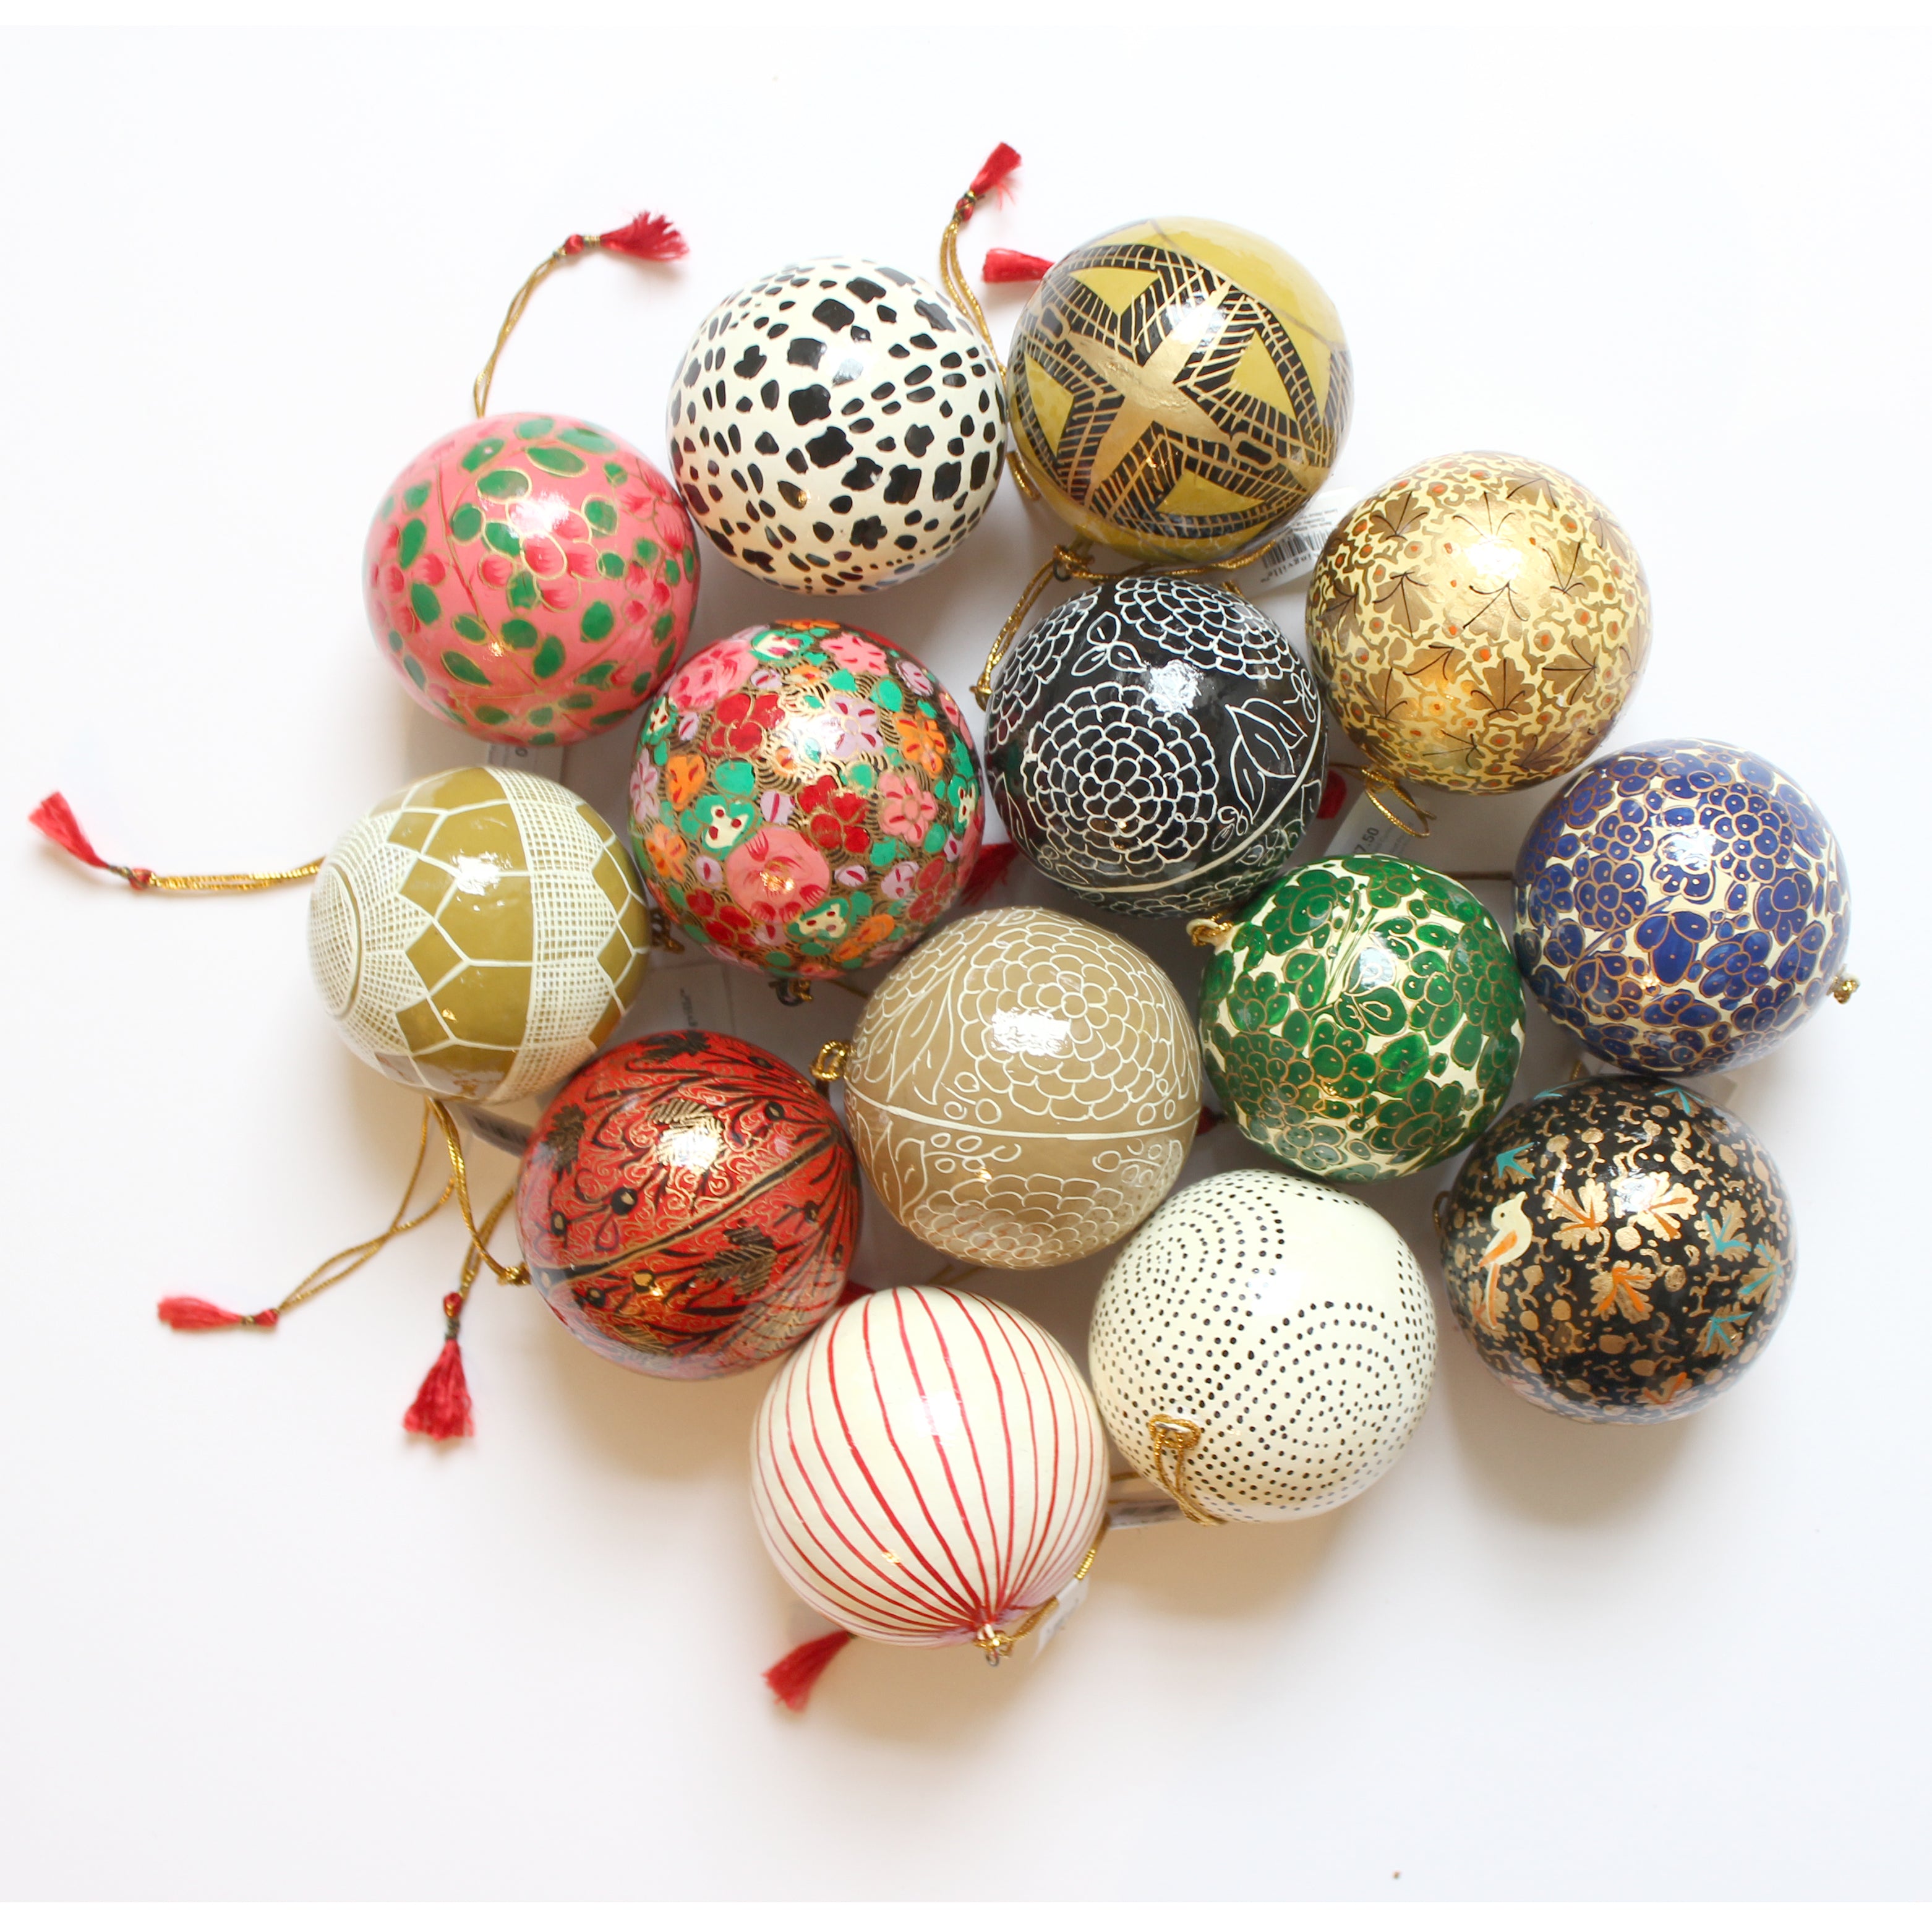 Handmade And Painted Papier Mache Bauble